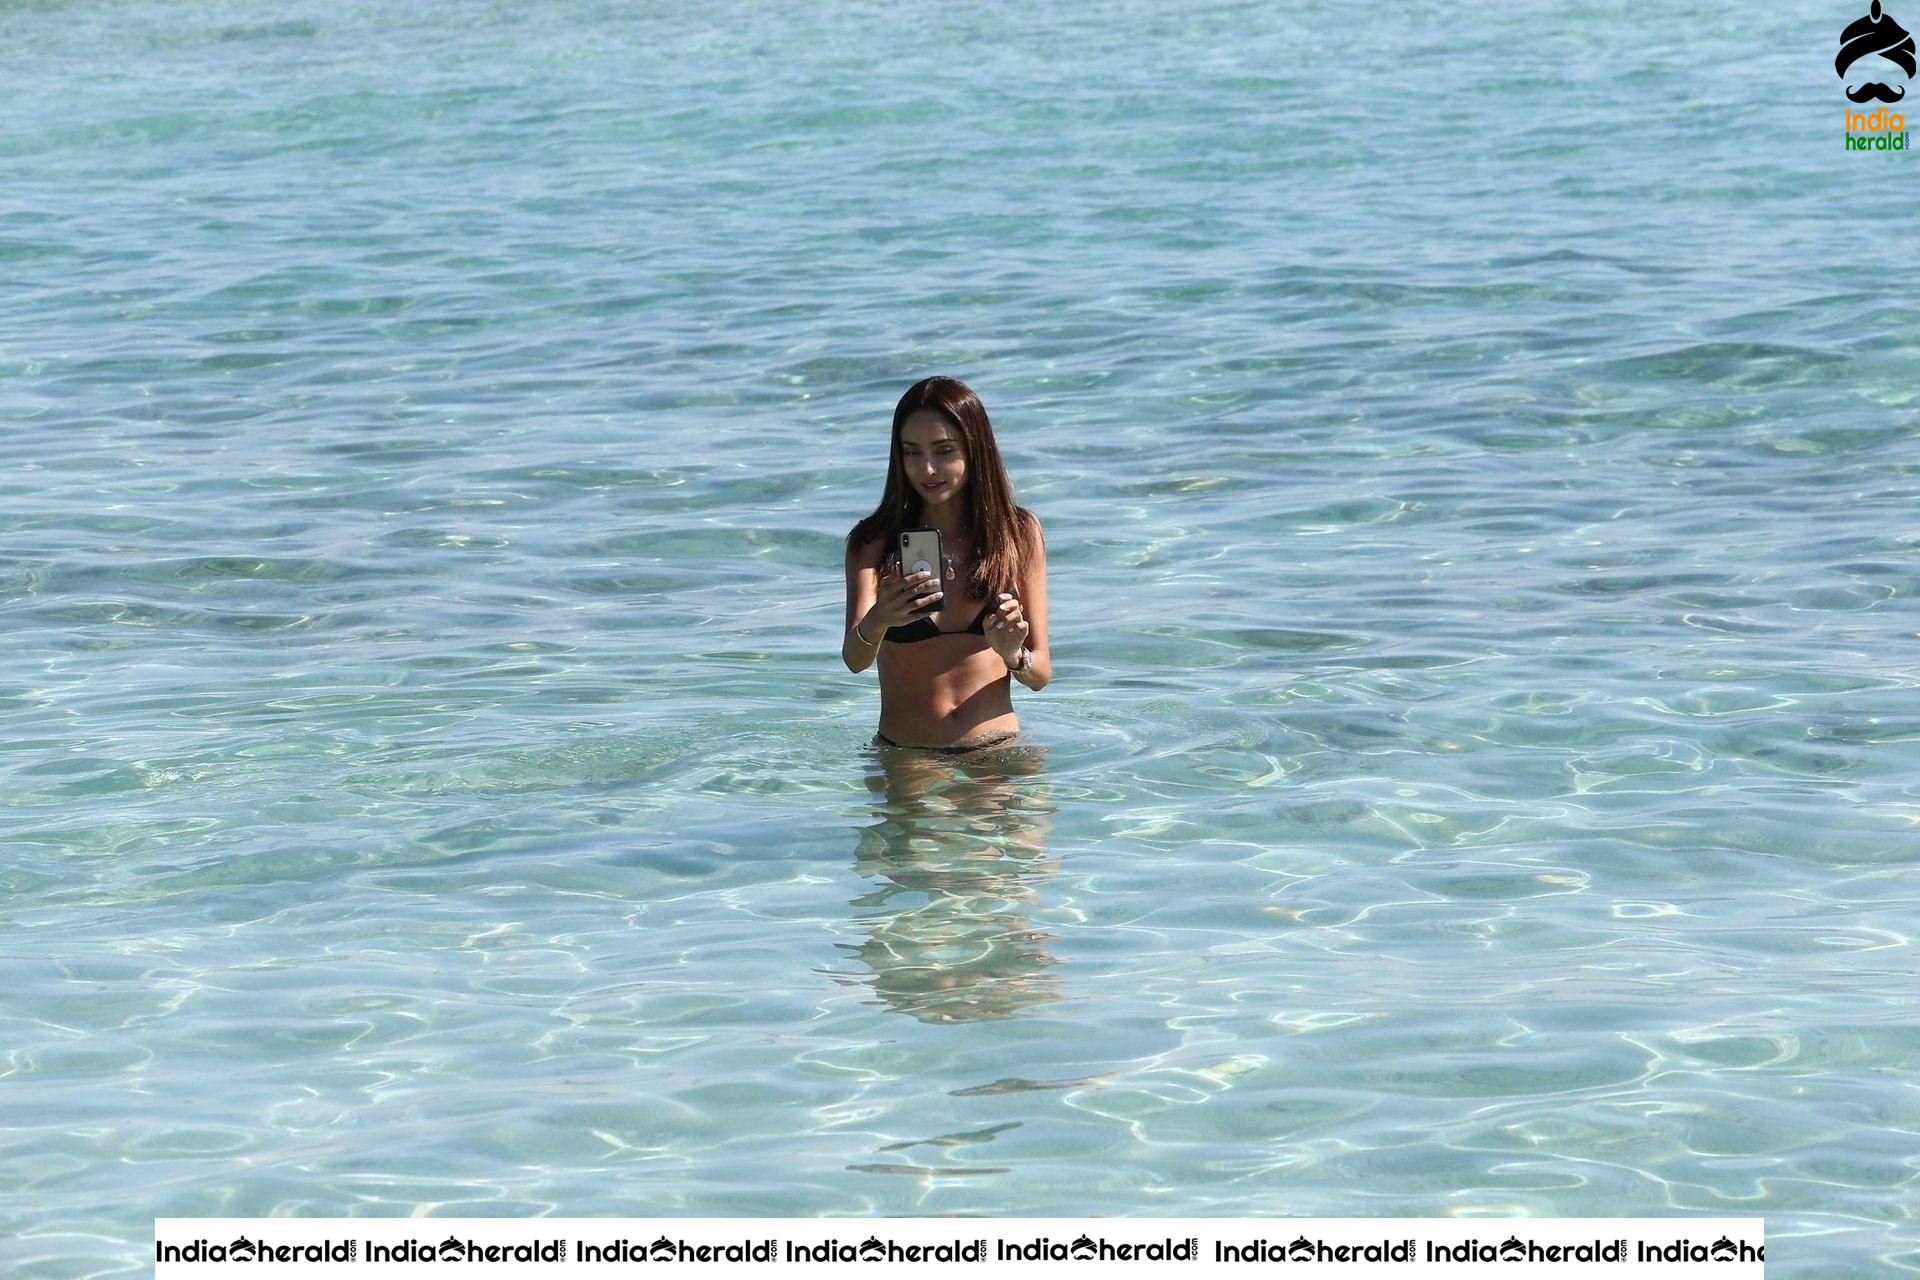 Patricia Contreras takes a quick dip in the water while at the beach in Miami